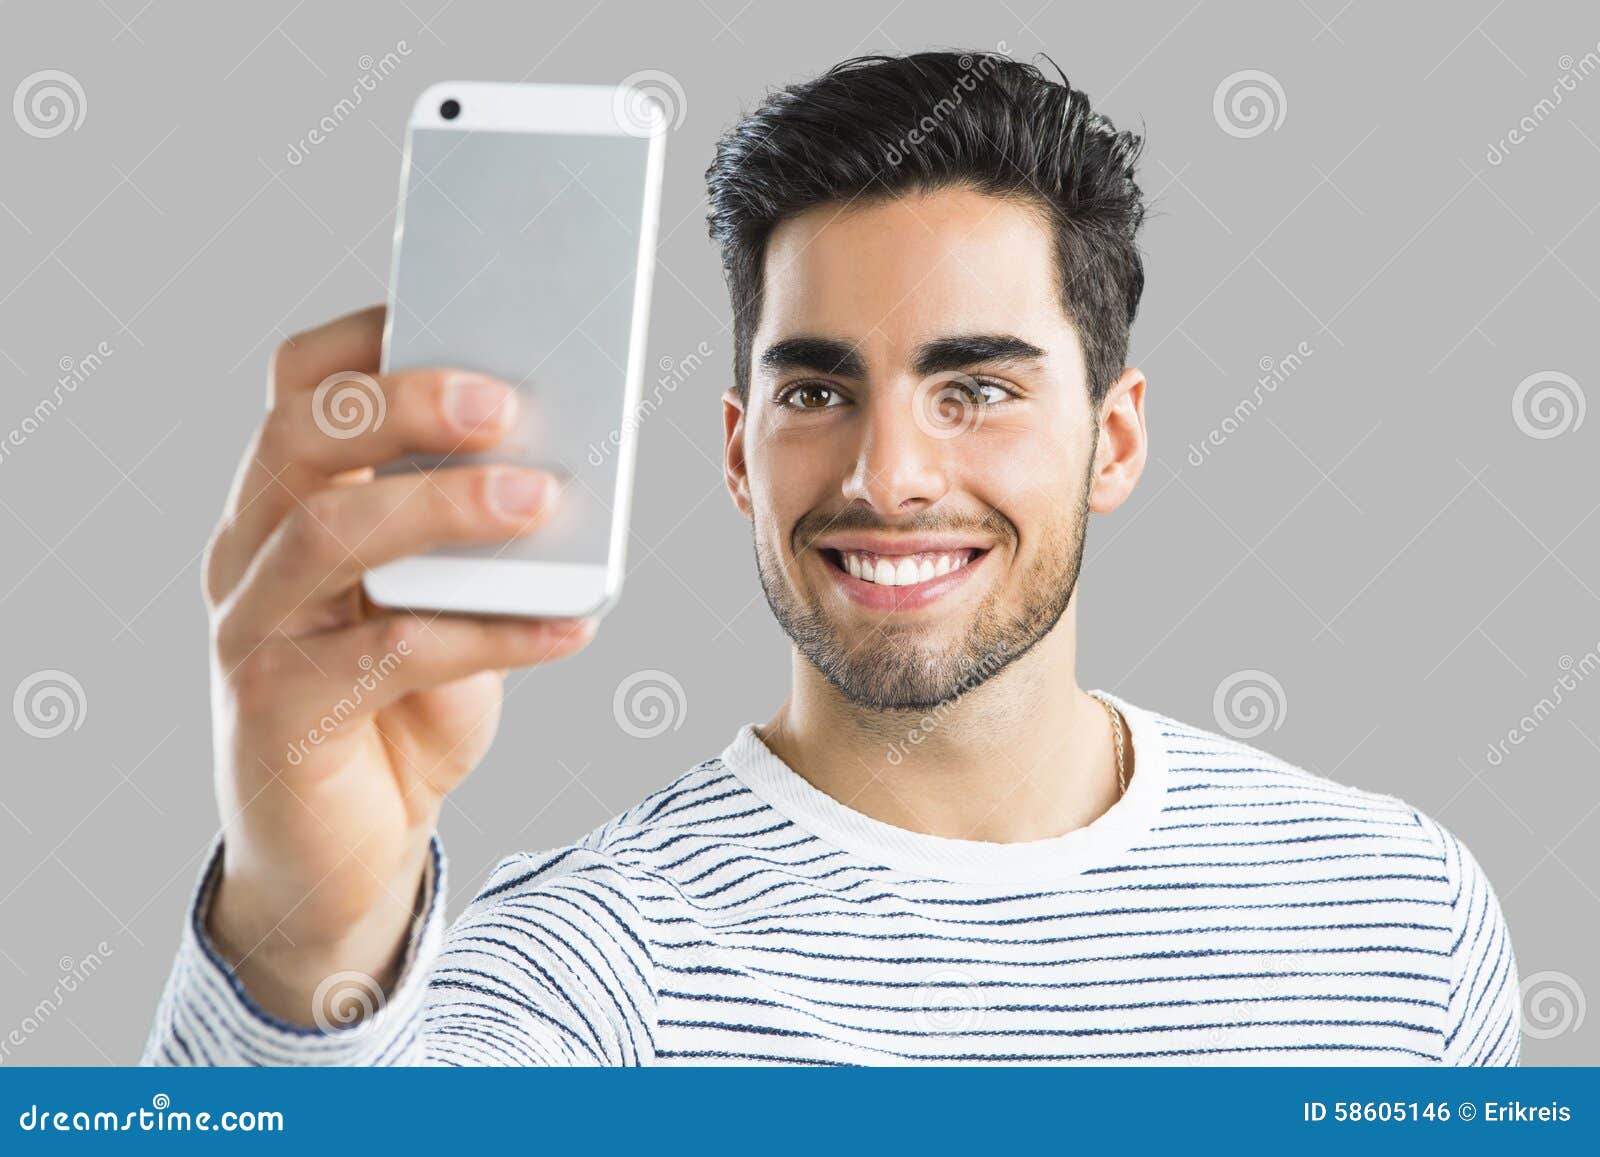 Handsome Man Making a Selfie Stock Photo - Image of confident, handsome ...